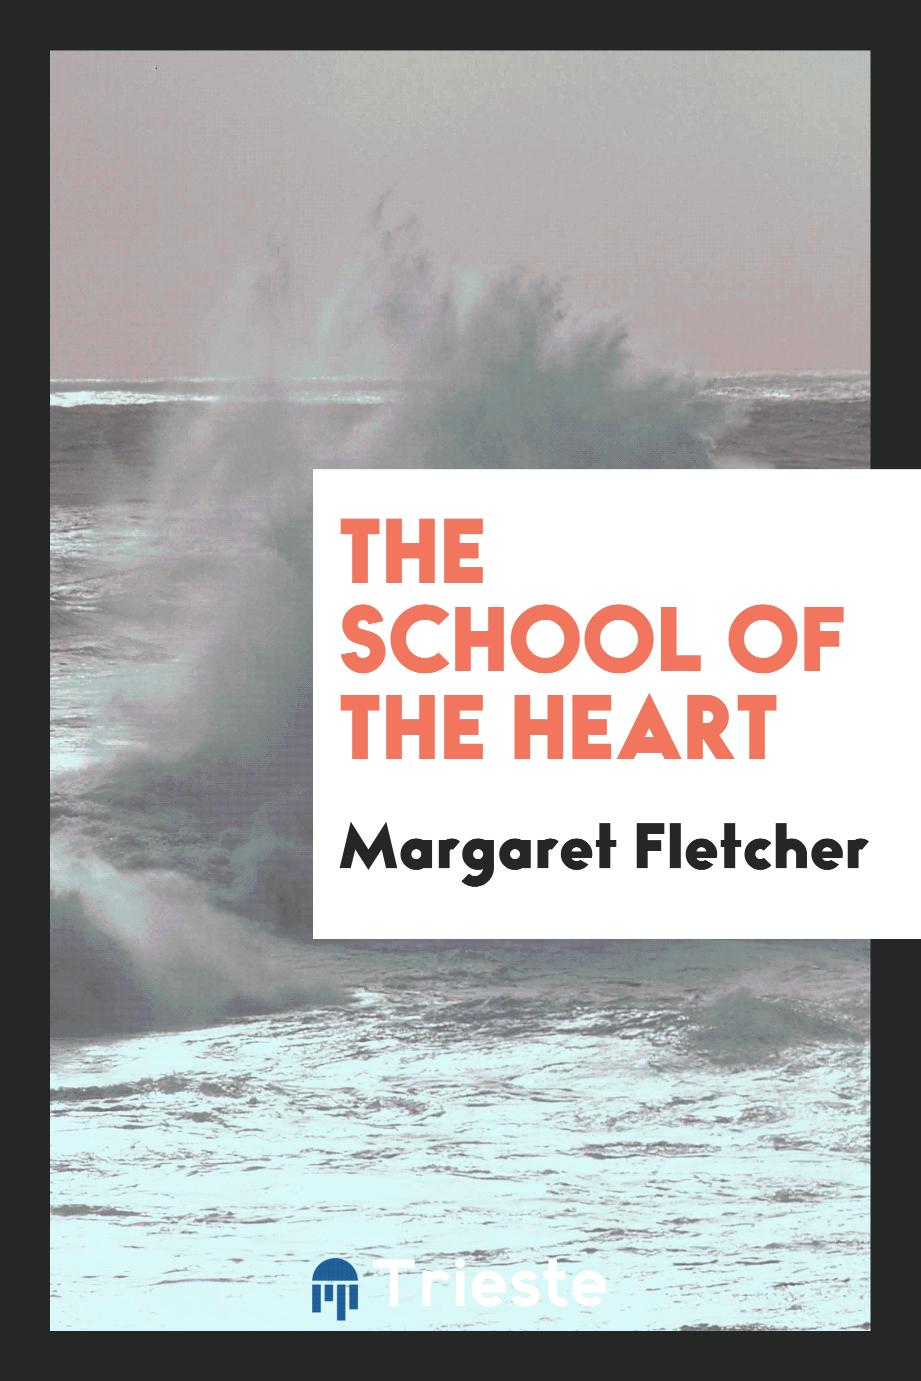 The School of the Heart